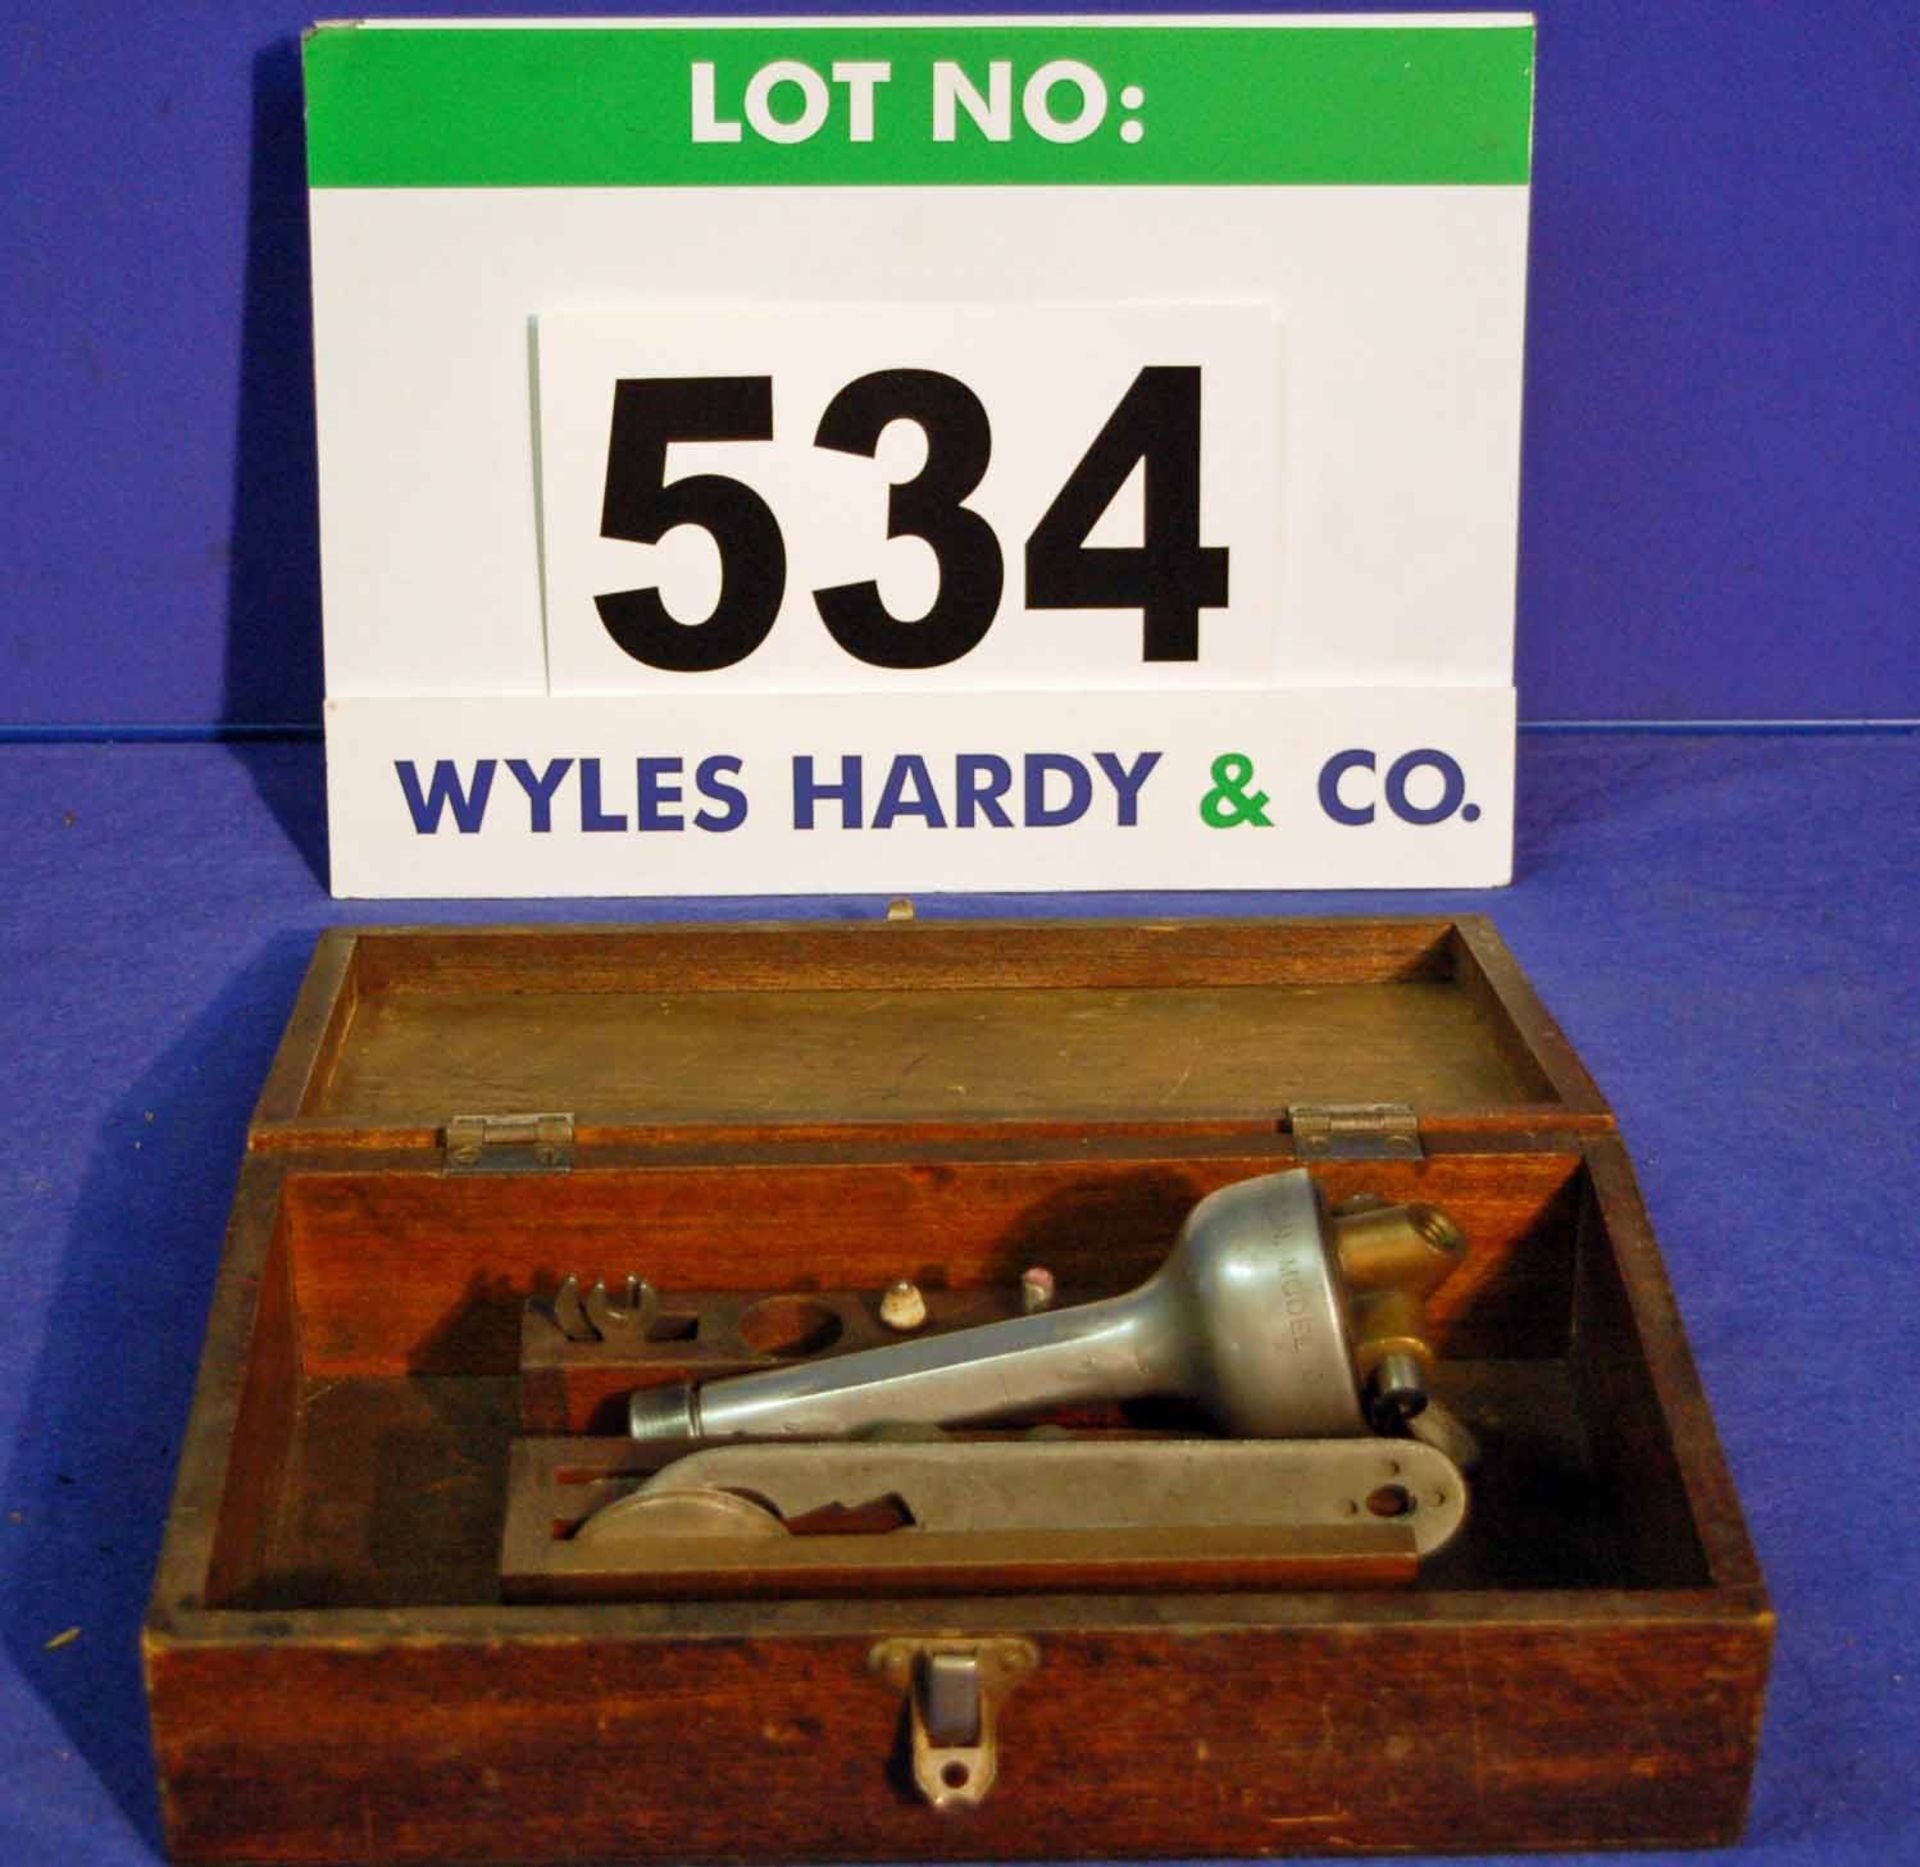 A DESOUTTER Hand Held Air Operated Mini Grinding, Etching and Polishing Tool in Wooden Case